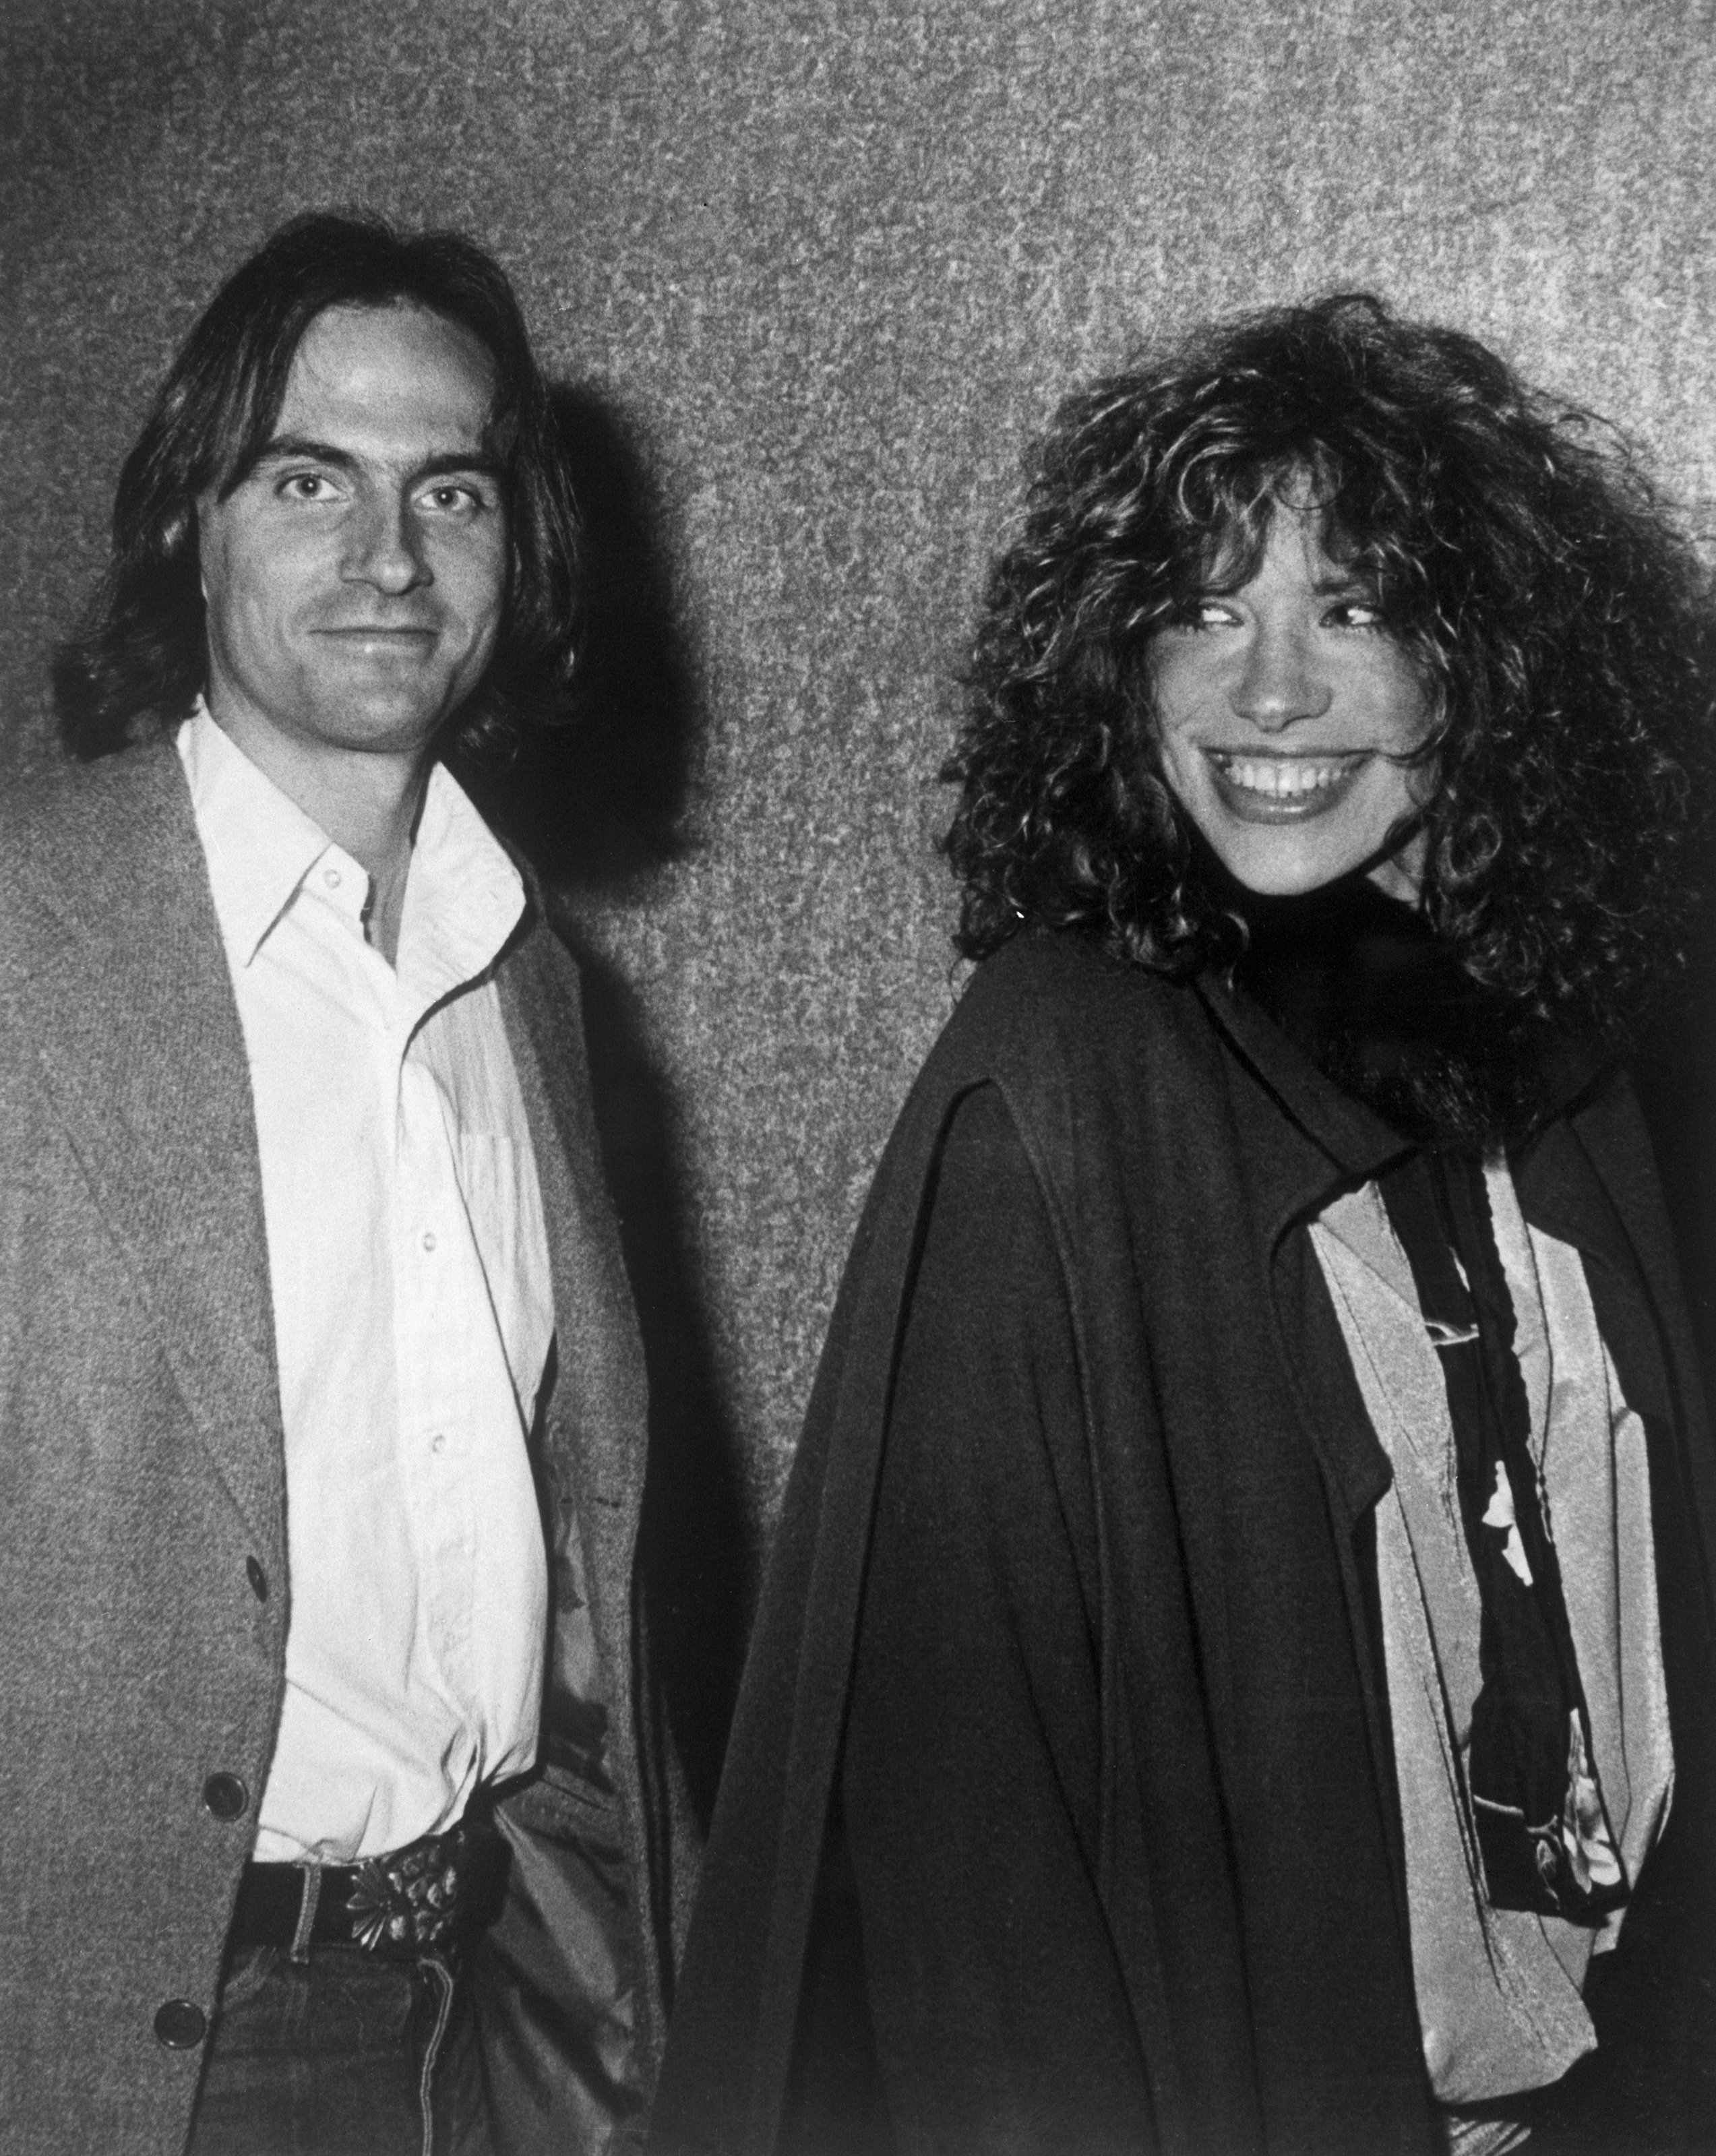 Musician James Tayor and Carly Simon attend a preview of "The Last Waltz" movie on April 17, 1978 ┃Source: Getty Images